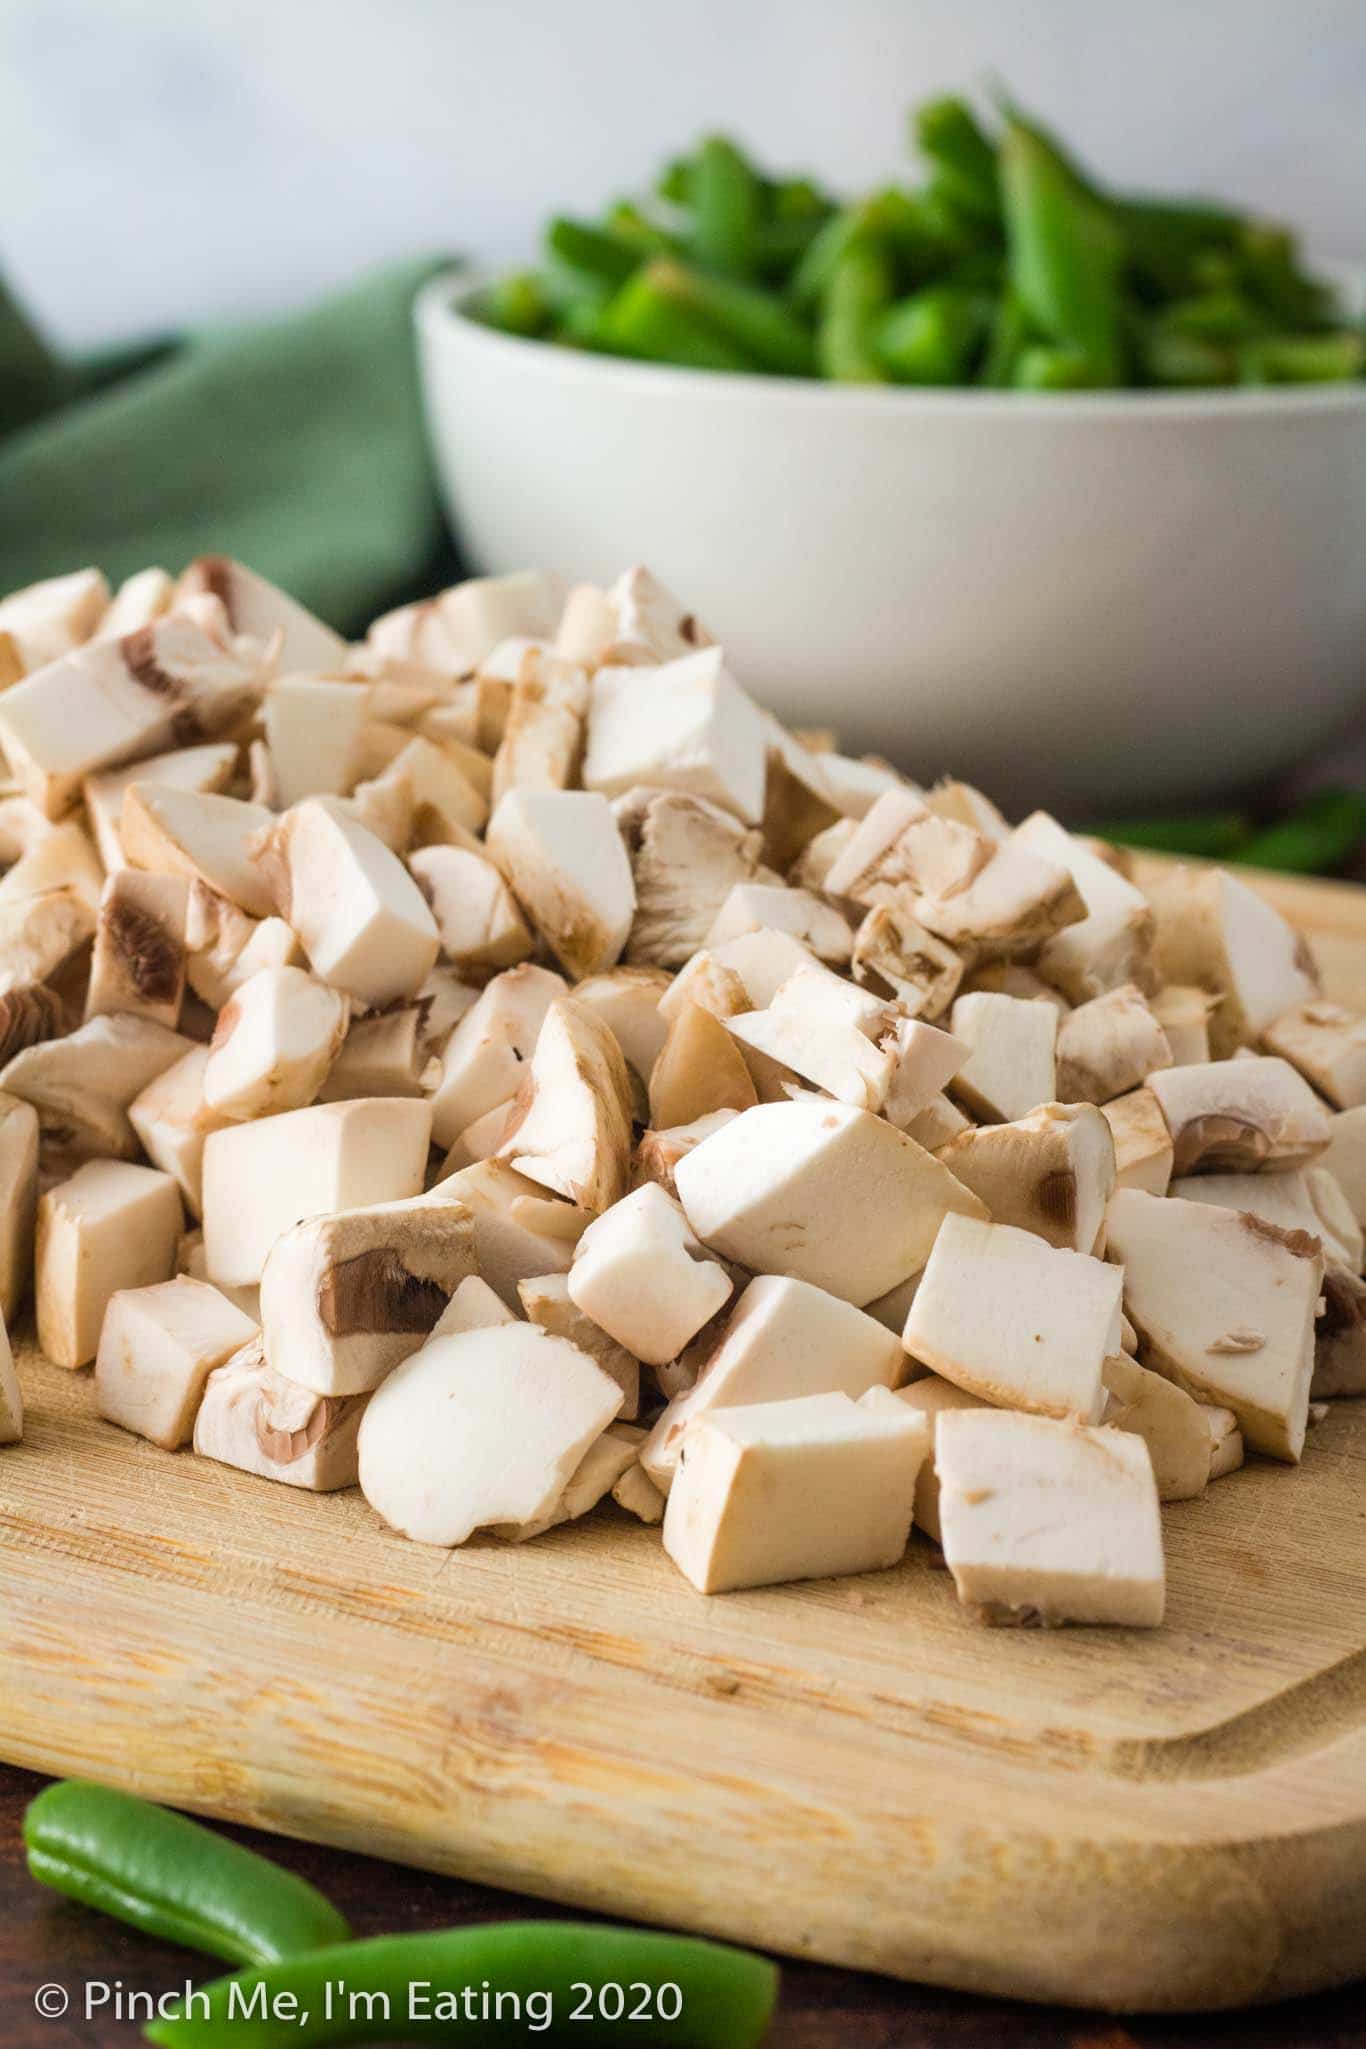 Bamboo cutting board with a pile of diced mushrooms on it, with a white bowl of fresh green beans blurred in the background